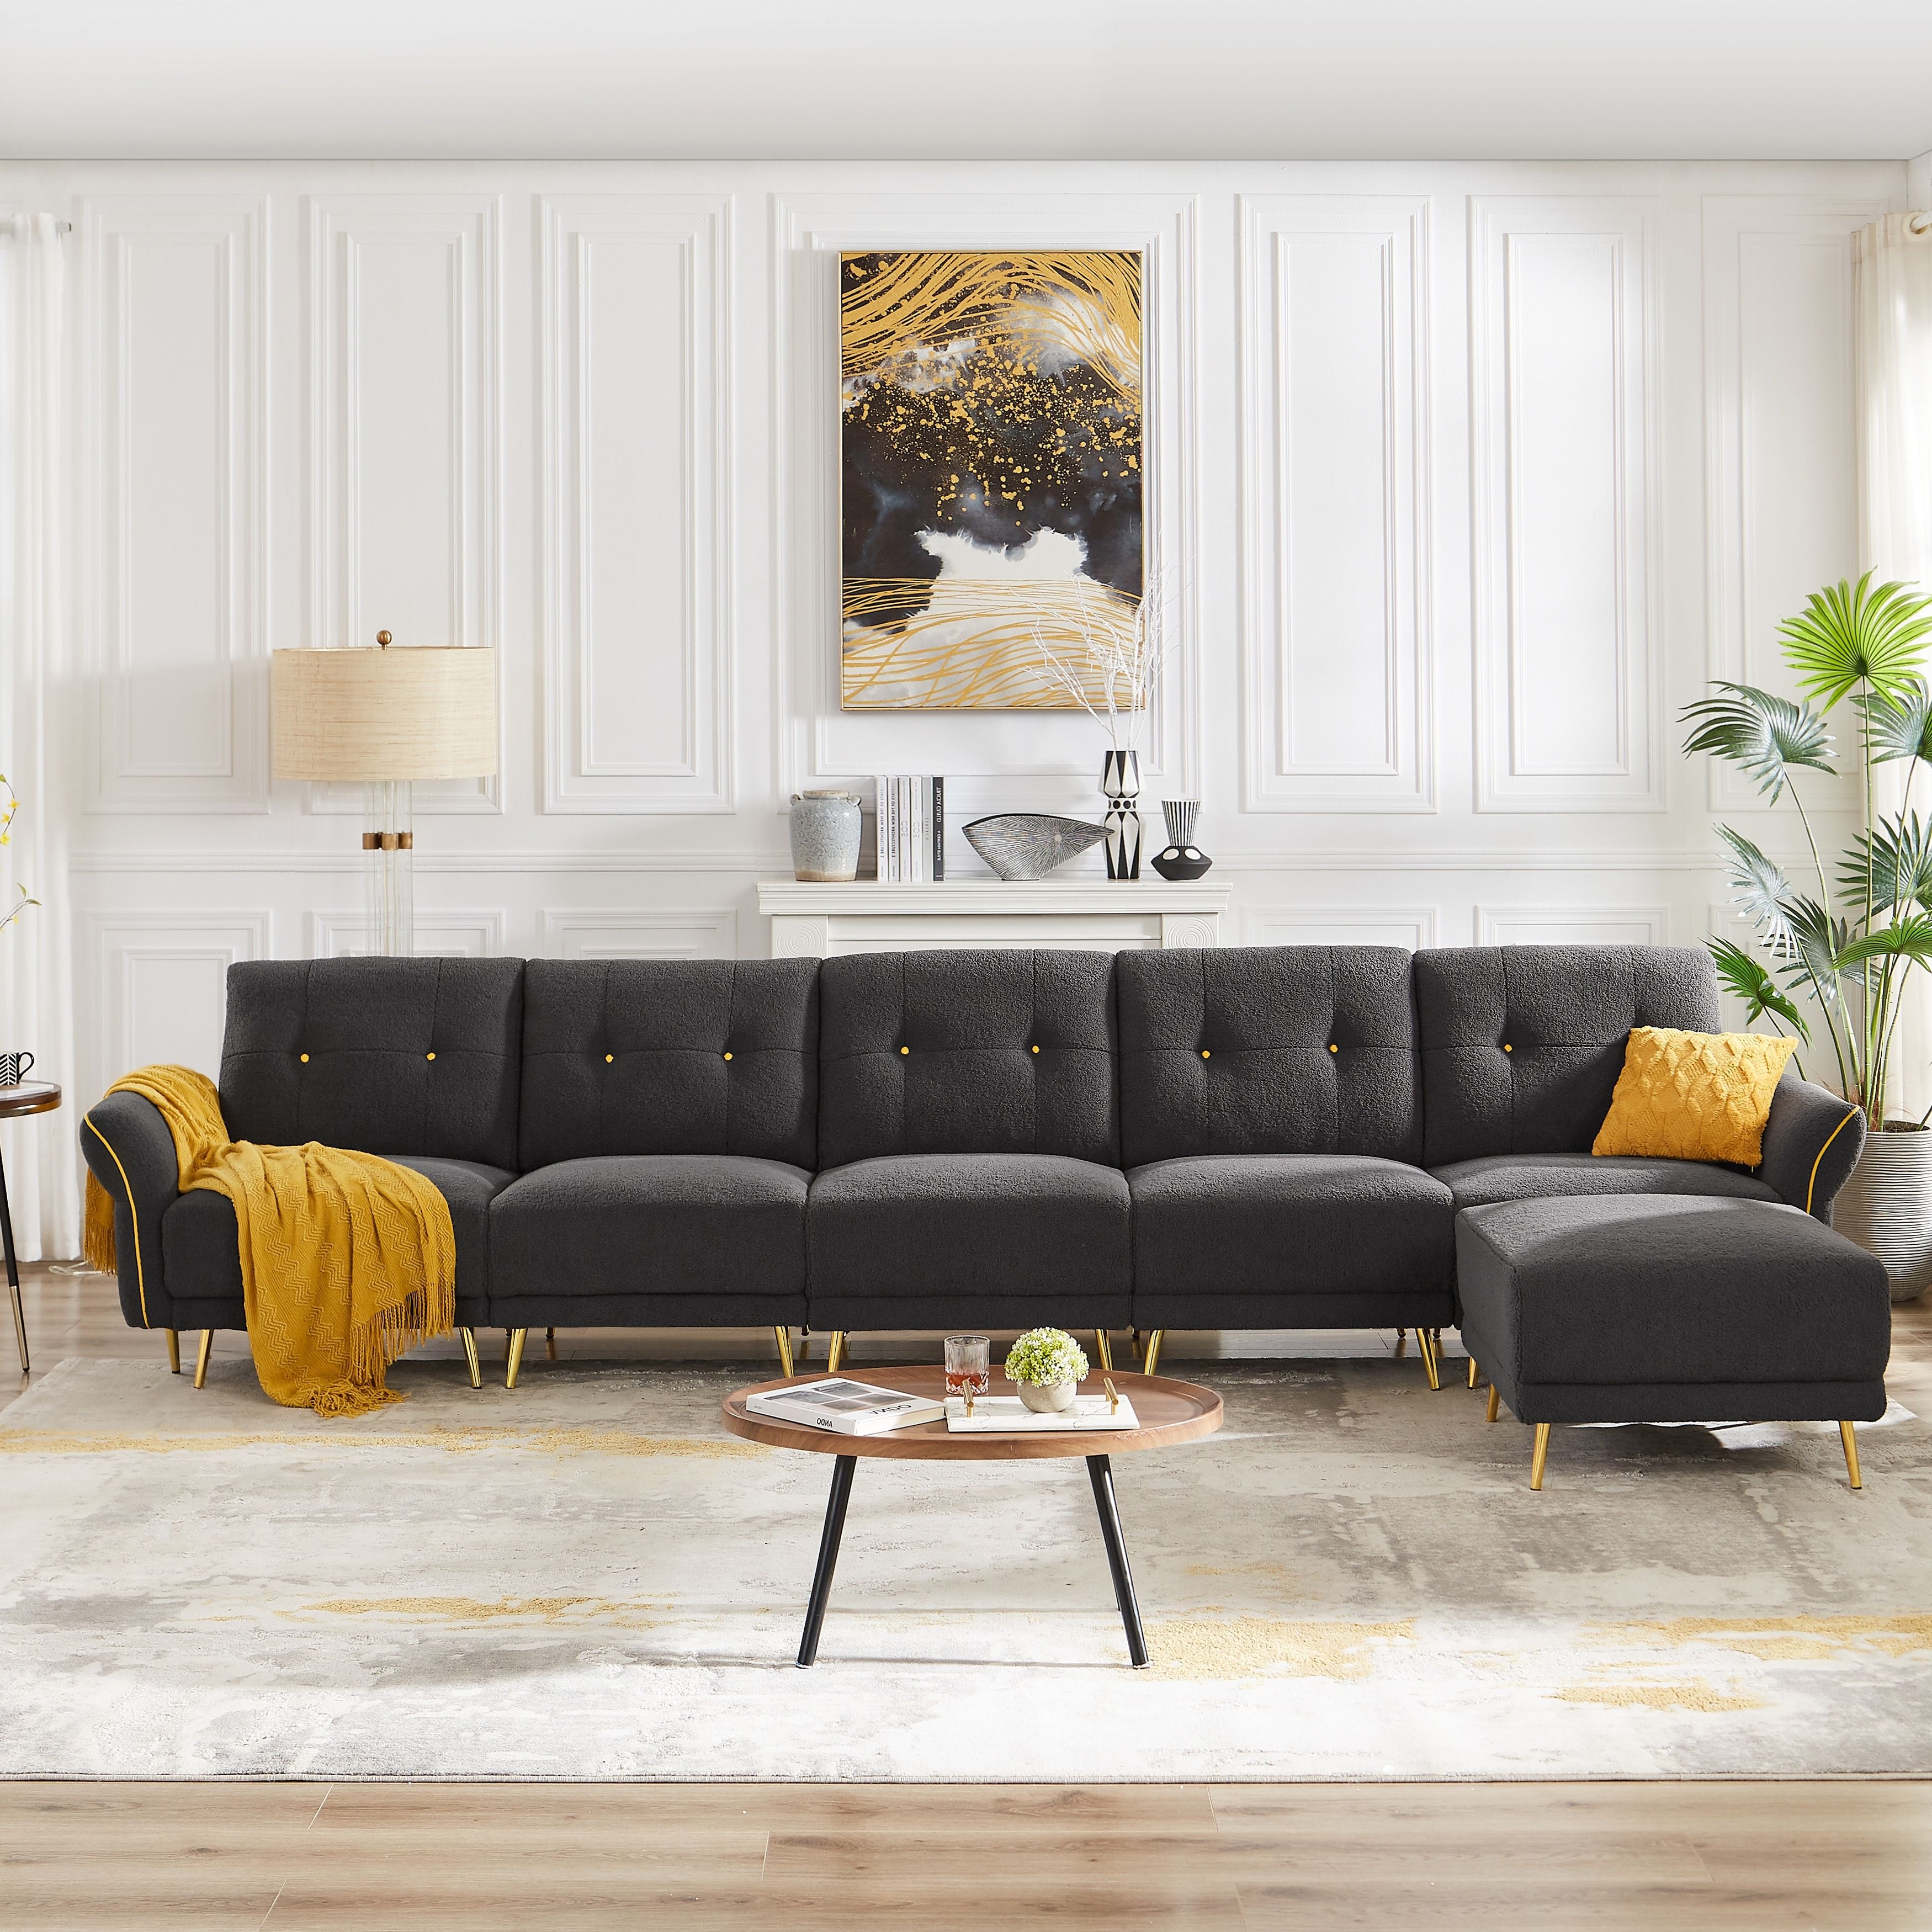 Modular Sofa Couch, Modern Sectional Sofa Couch, Soft Sherpa Fabric Sofa  And Ottoman In Free Combination – Overstock – 37522752 Throughout Free Combination Sectional Couches (View 15 of 20)